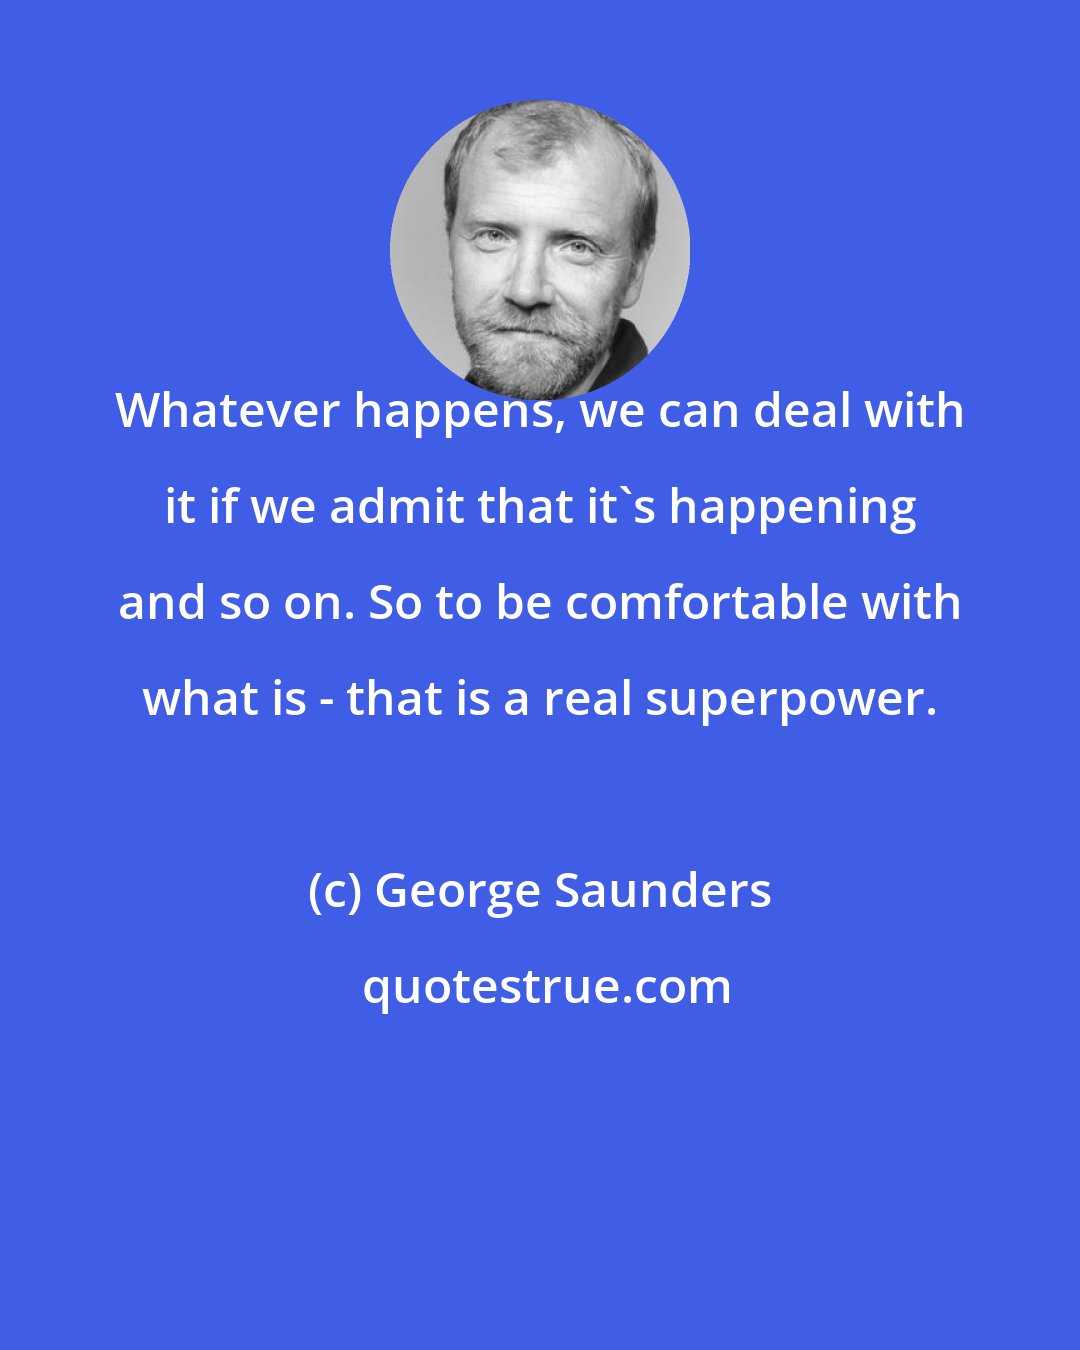 George Saunders: Whatever happens, we can deal with it if we admit that it's happening and so on. So to be comfortable with what is - that is a real superpower.